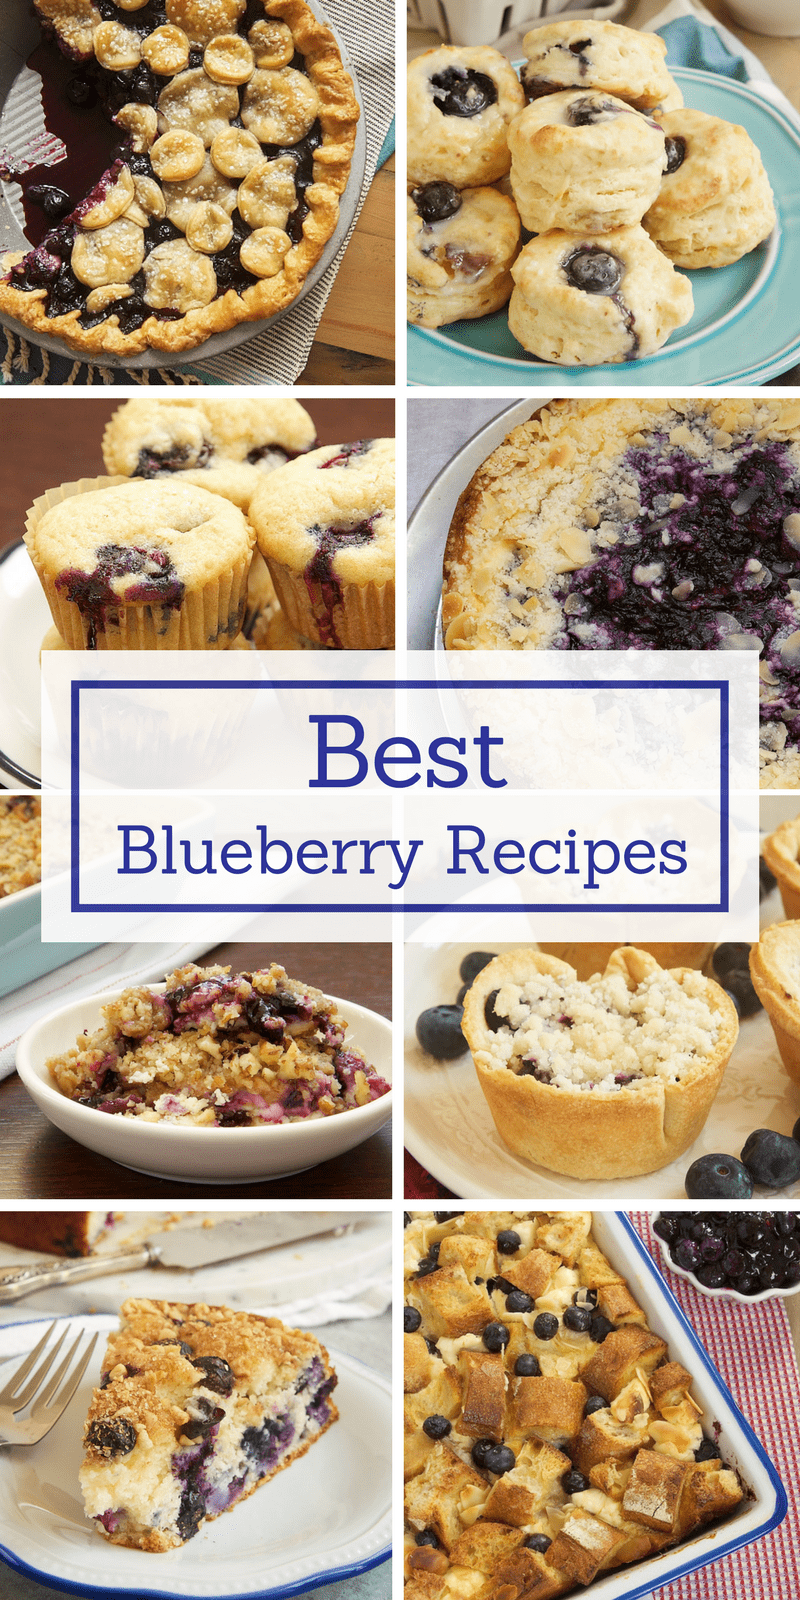 Indulge all your blueberry cravings with the best and most popular blueberry recipes from Bake or Break!